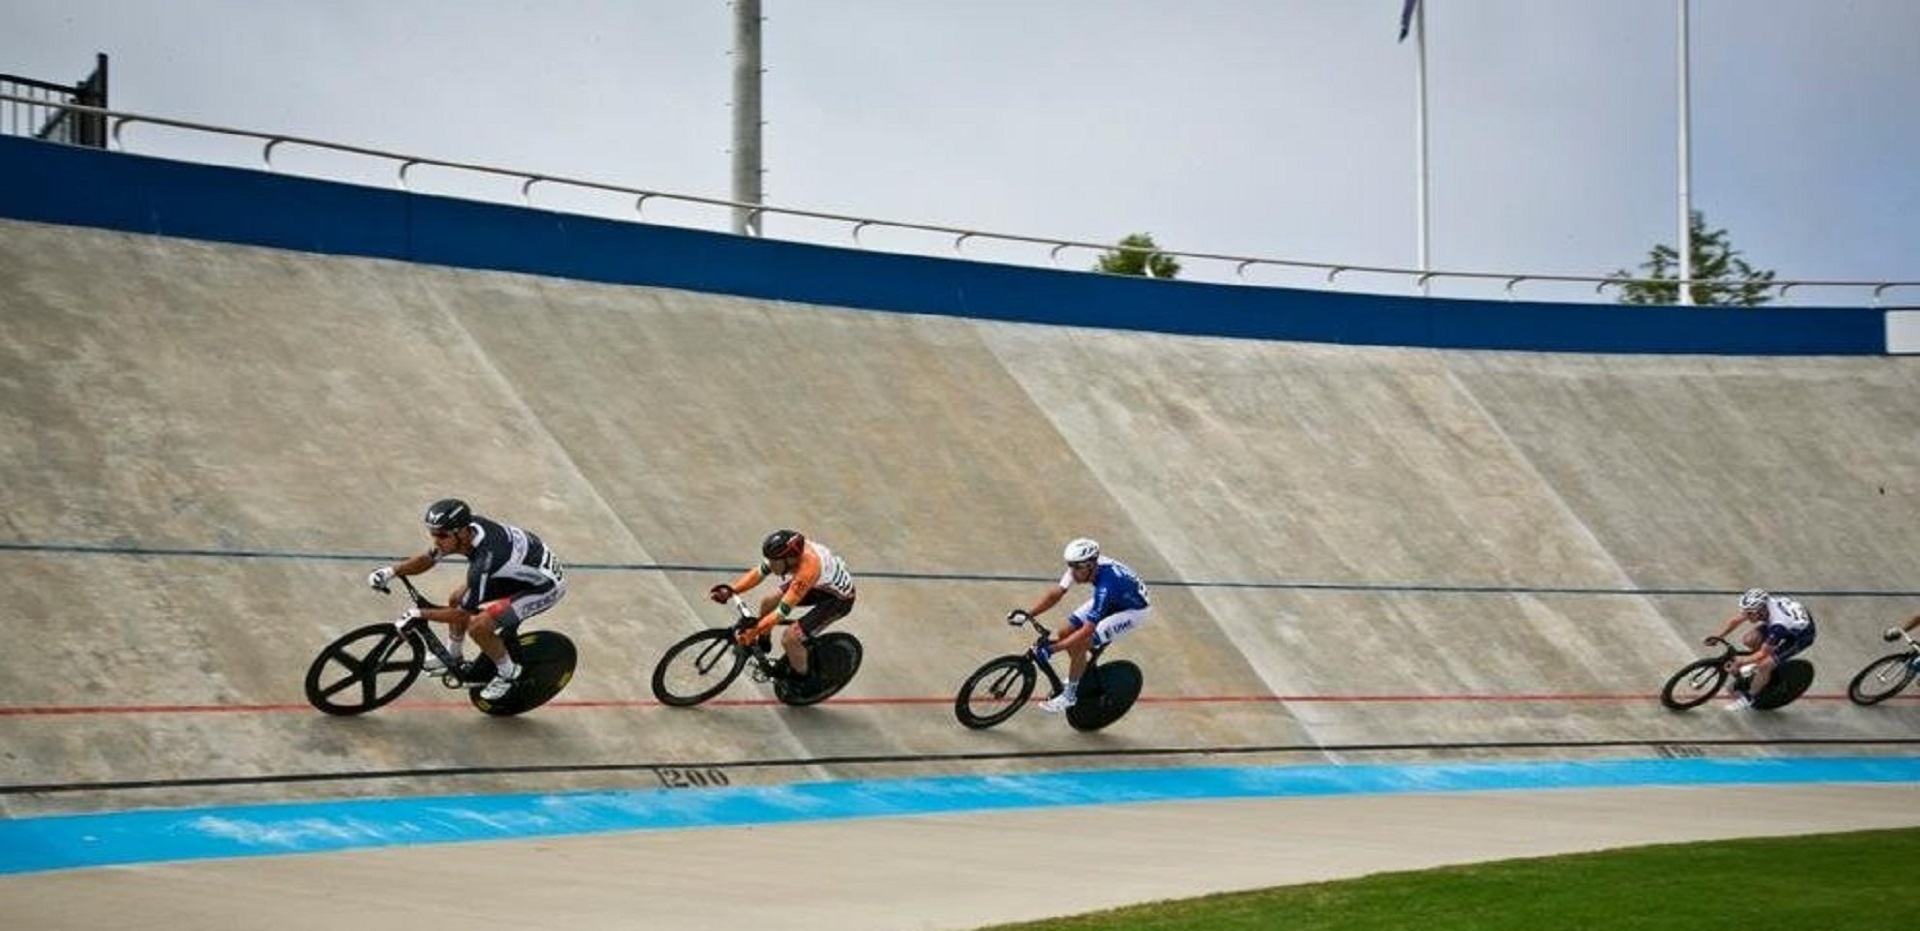 Cycling on the track photo